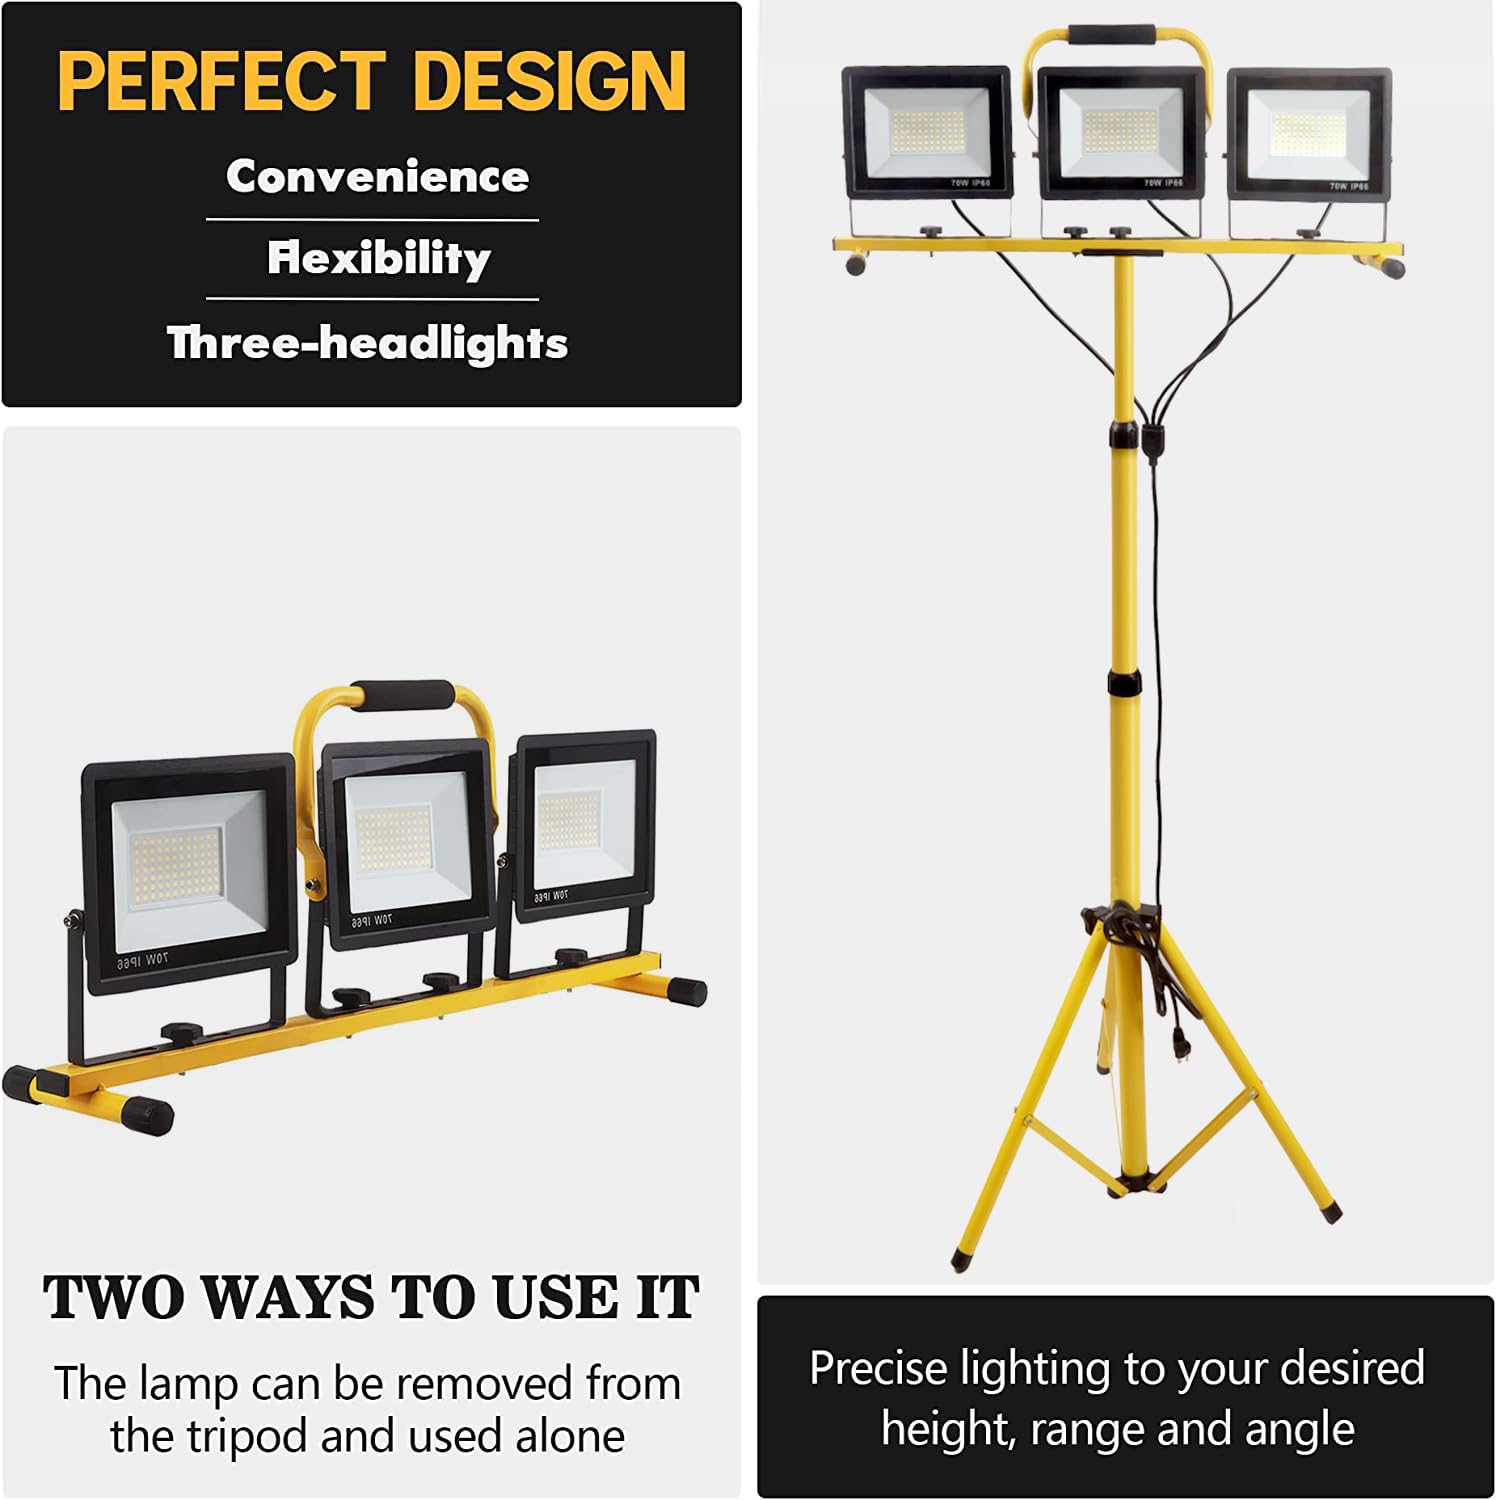 21000 Lumen Work Lights with Stand, 3 Adjustable Head LED Work Light, with Adjustable and Foldable Tripod Stand, Waterproof Lamp with Individual Switch with 6500 Kelvin Color Temperature